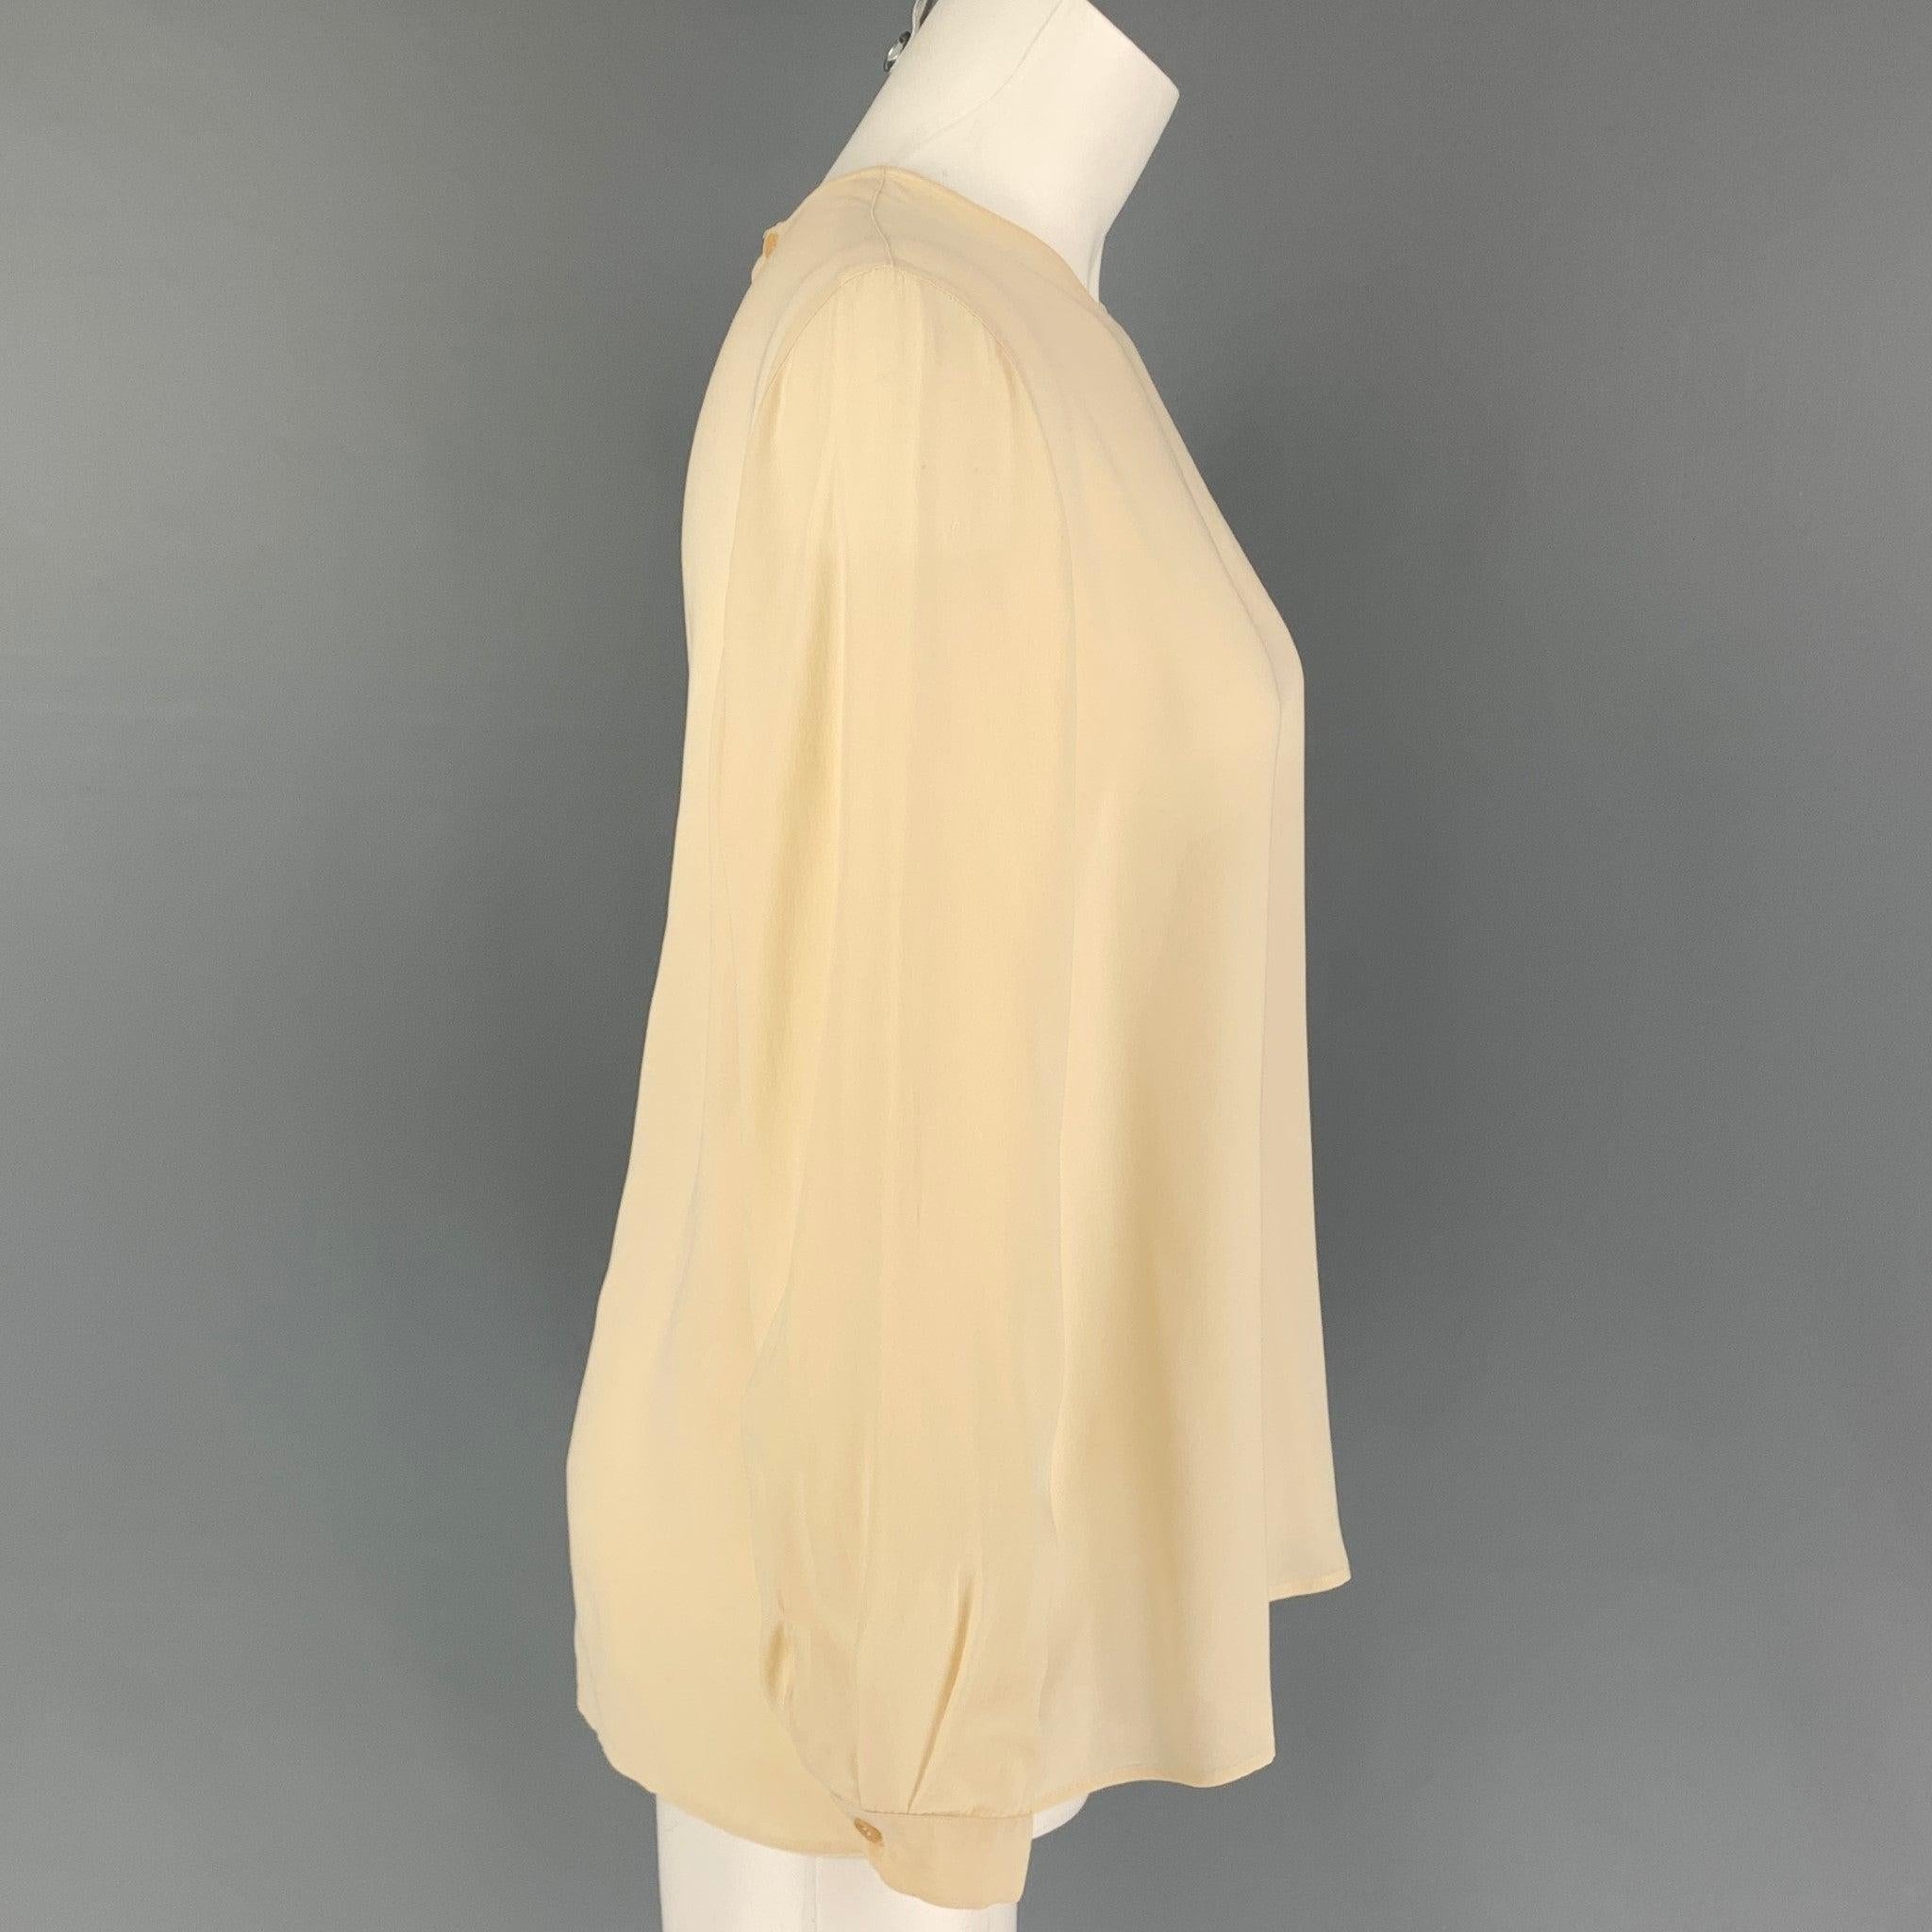 GIORGIO ARMANI blouse comes in a cream silk featuring a back buttoned closure.
Good
Pre-Owned Condition. Moderate discoloration at front & back.  

Marked:   46 

Measurements: 
 
Shoulder: 15 inches  Bust: 42 inches  Sleeve: 22.5 inches  Length: 25